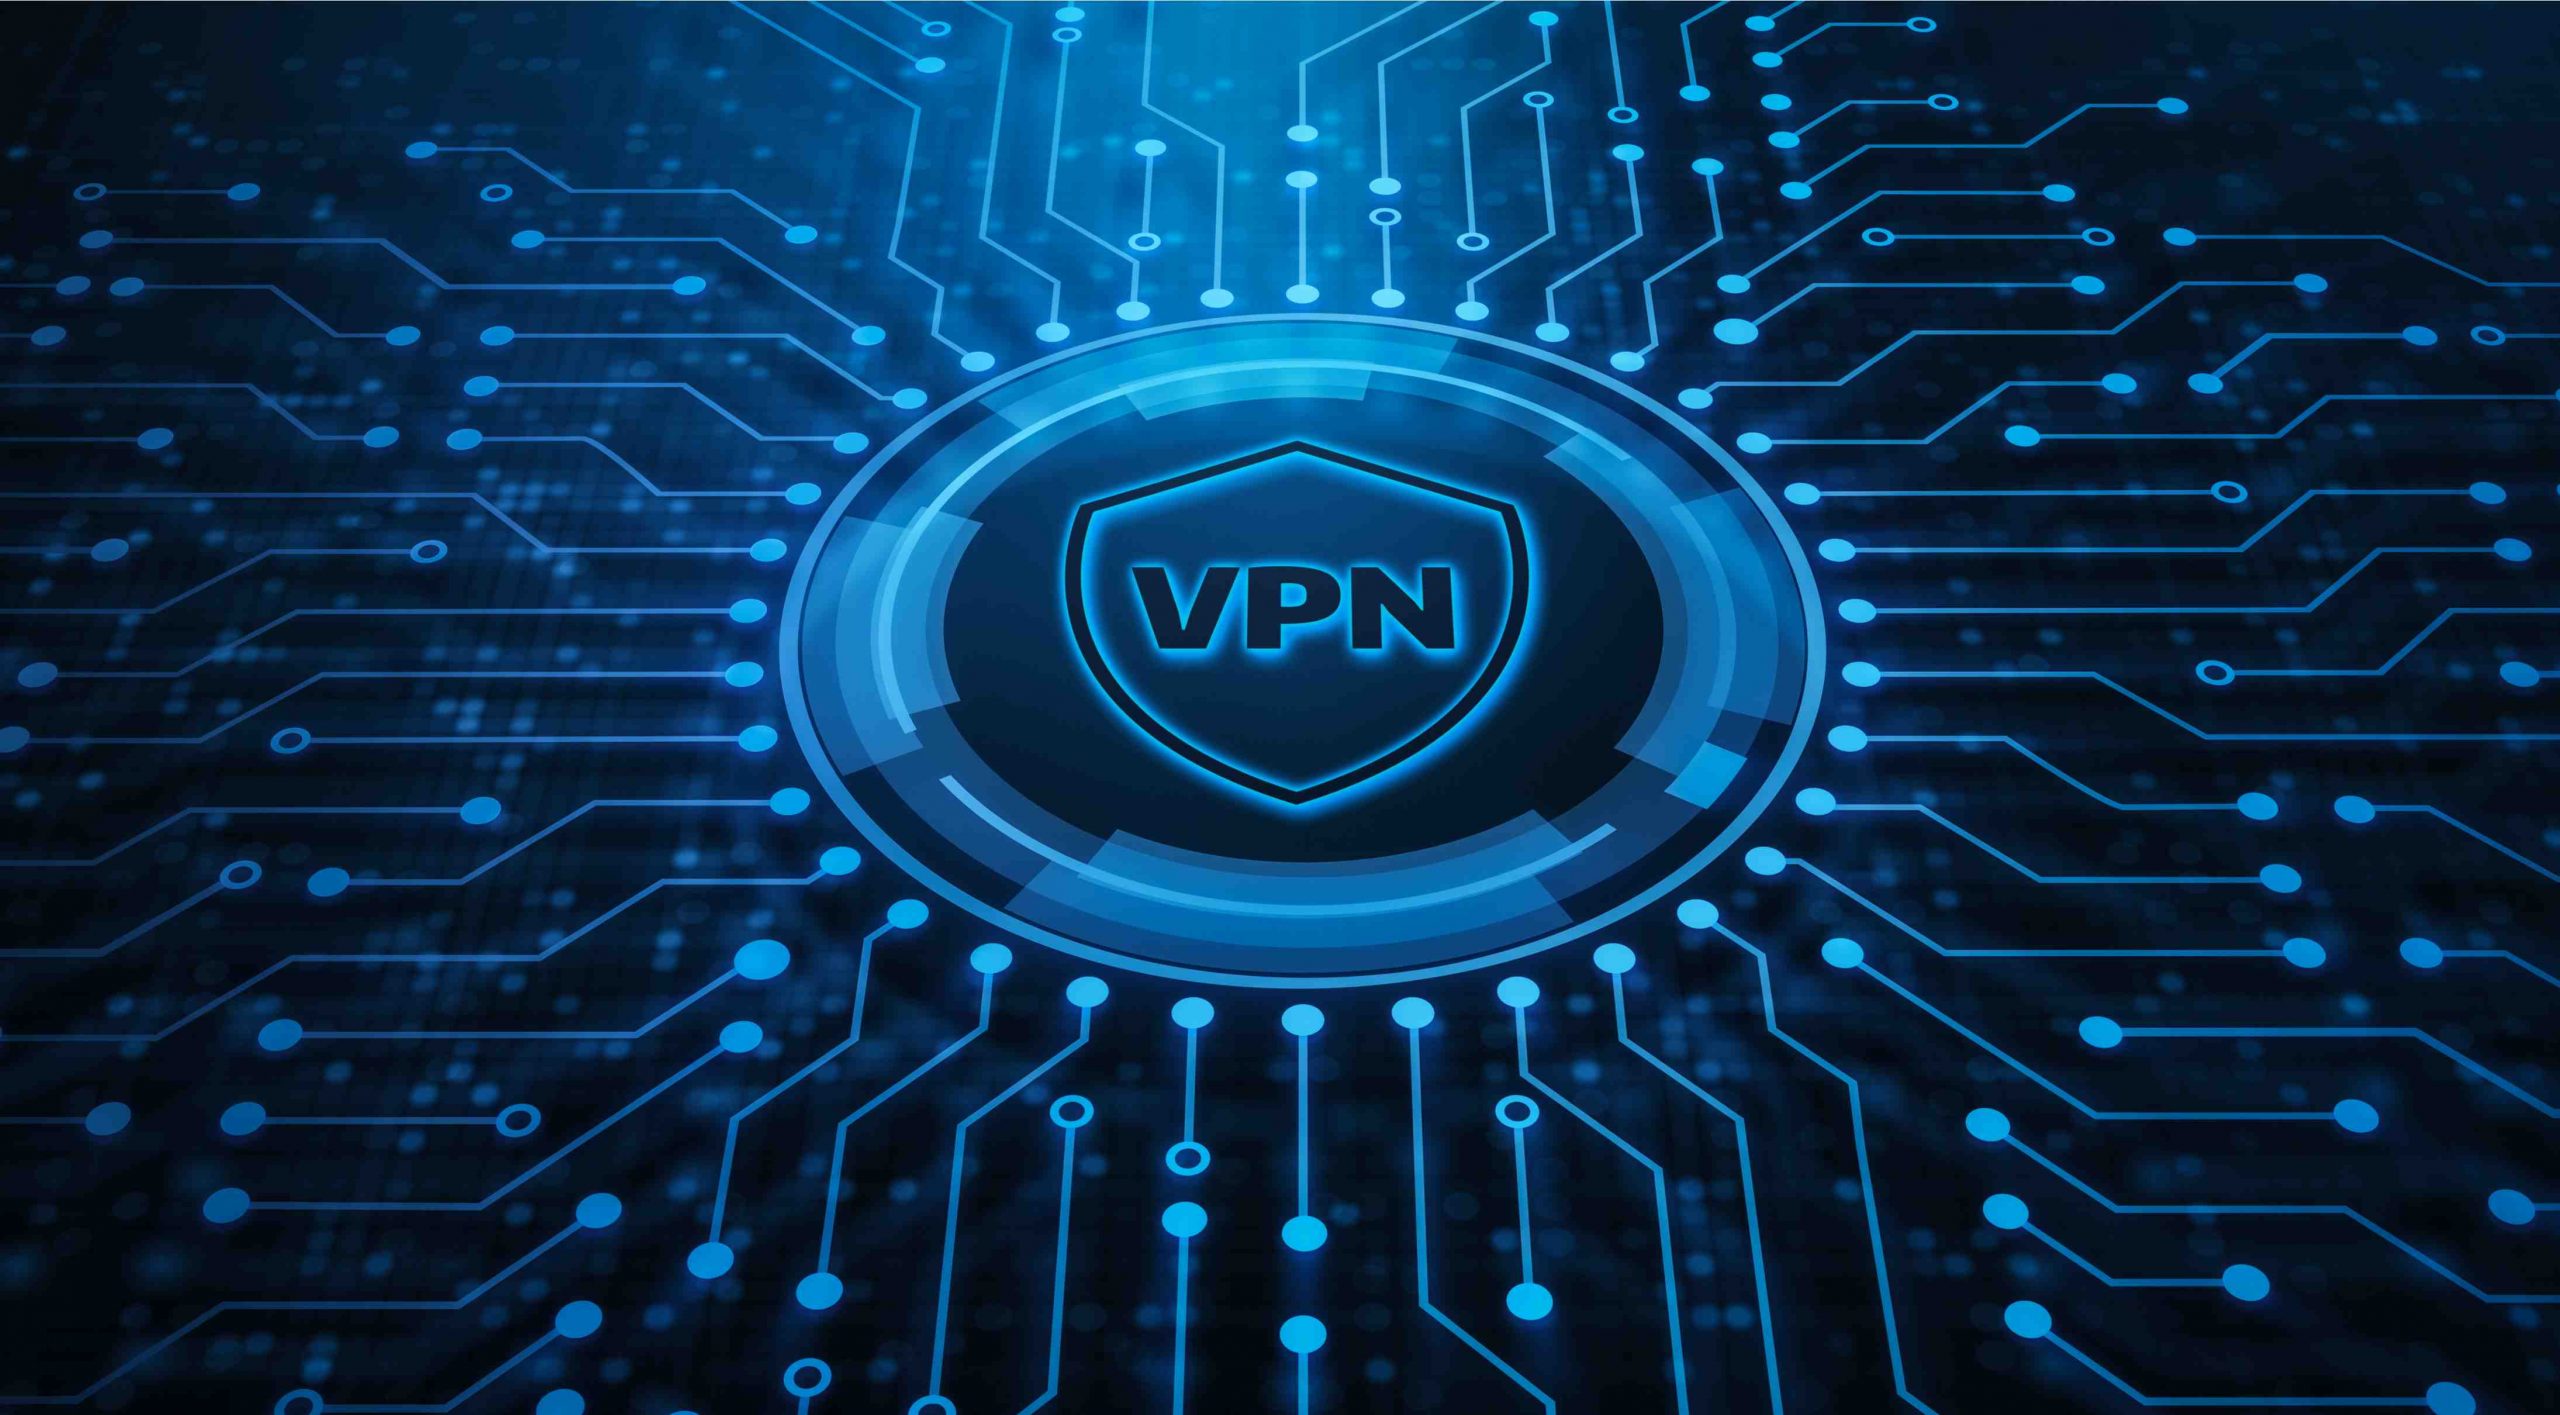 Is there a downside to having a VPN?